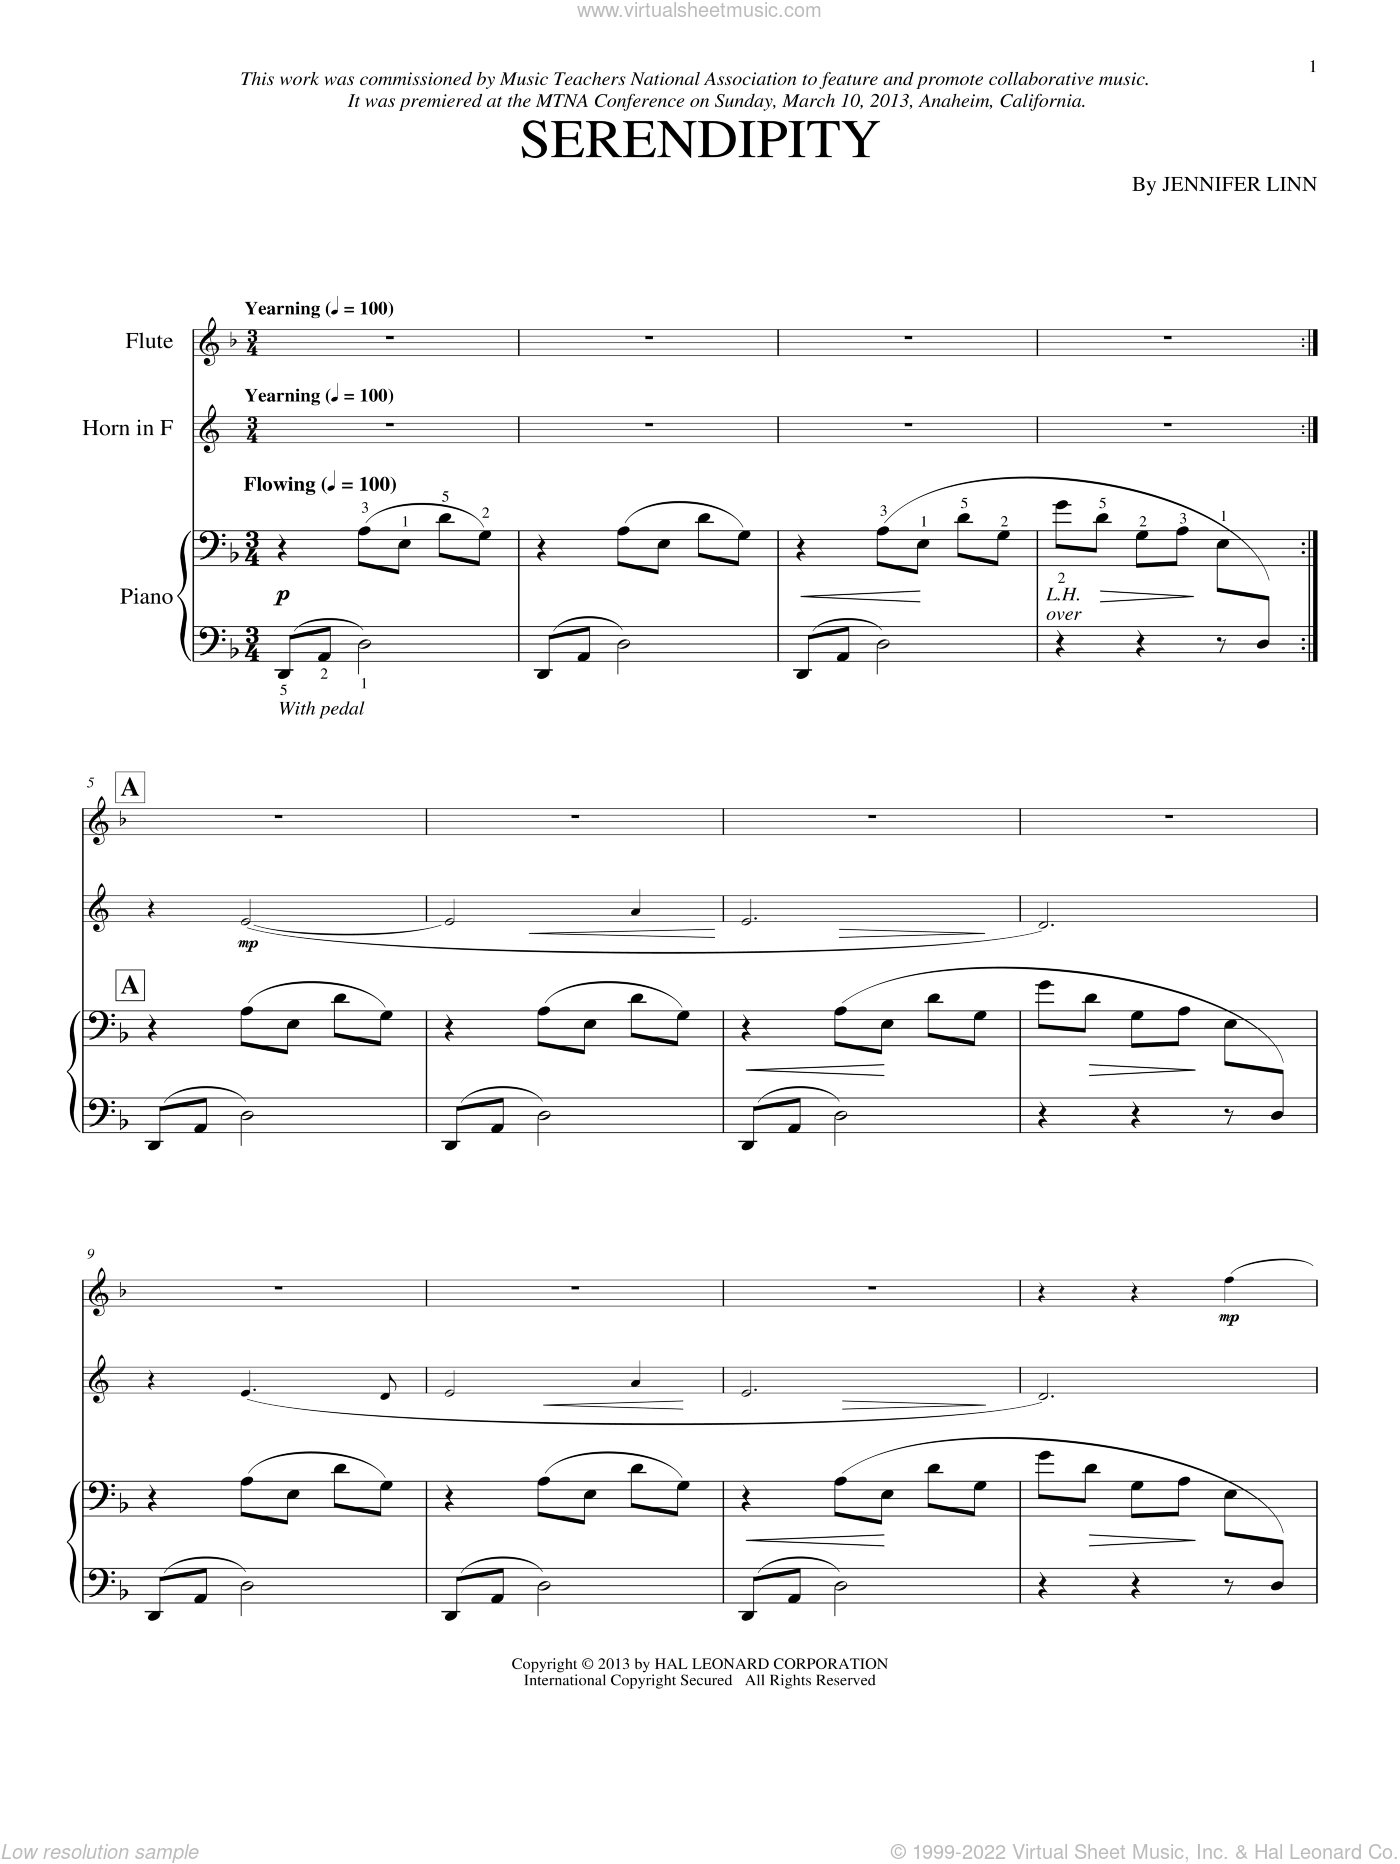 Buy Top Tunes for Flute Online at $8.99 - Flute World